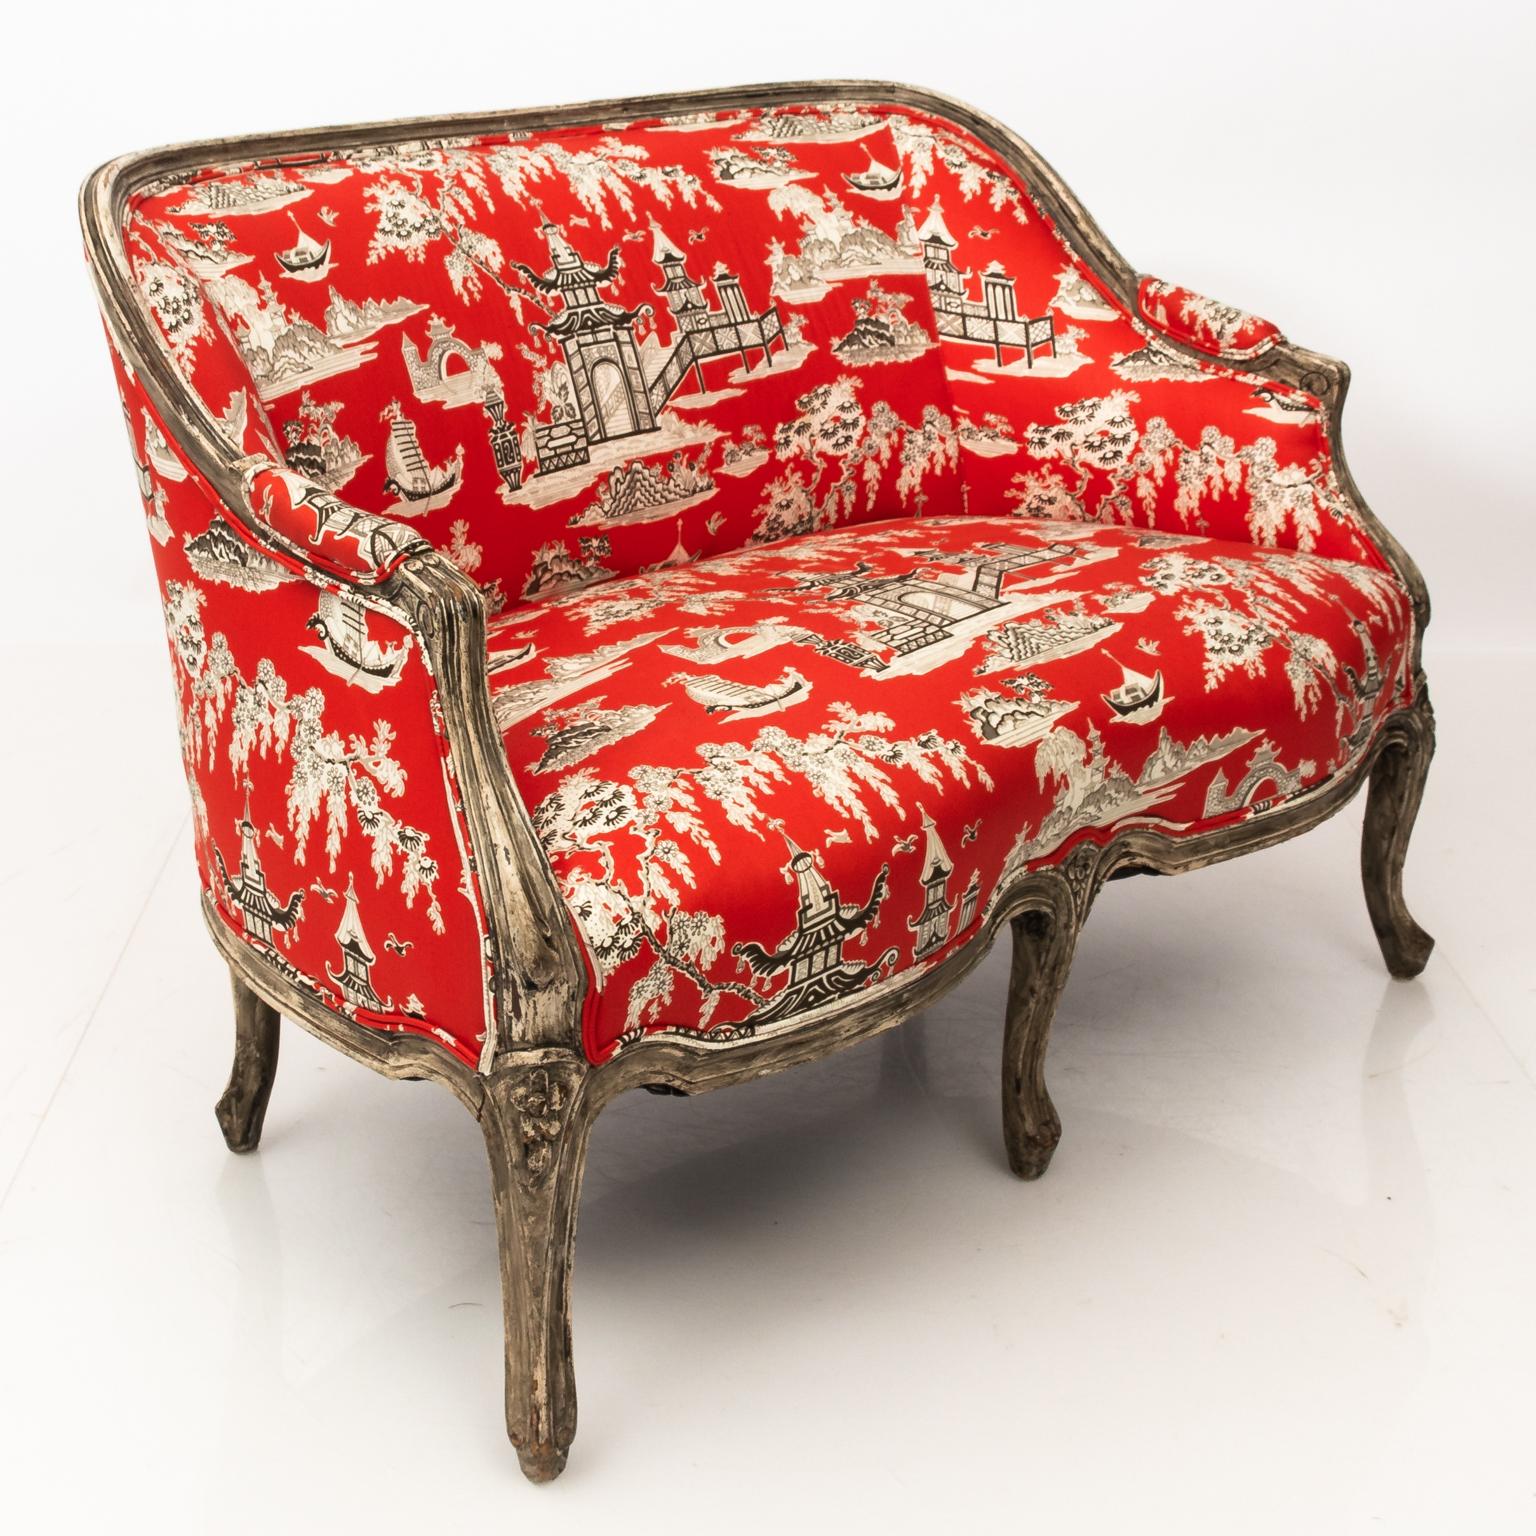 Louis XVI style French settee newly upholstered in chinoiserie red fabric. Berger style frame resting on a six legged support with scrolled arms and cabriole legs.
     